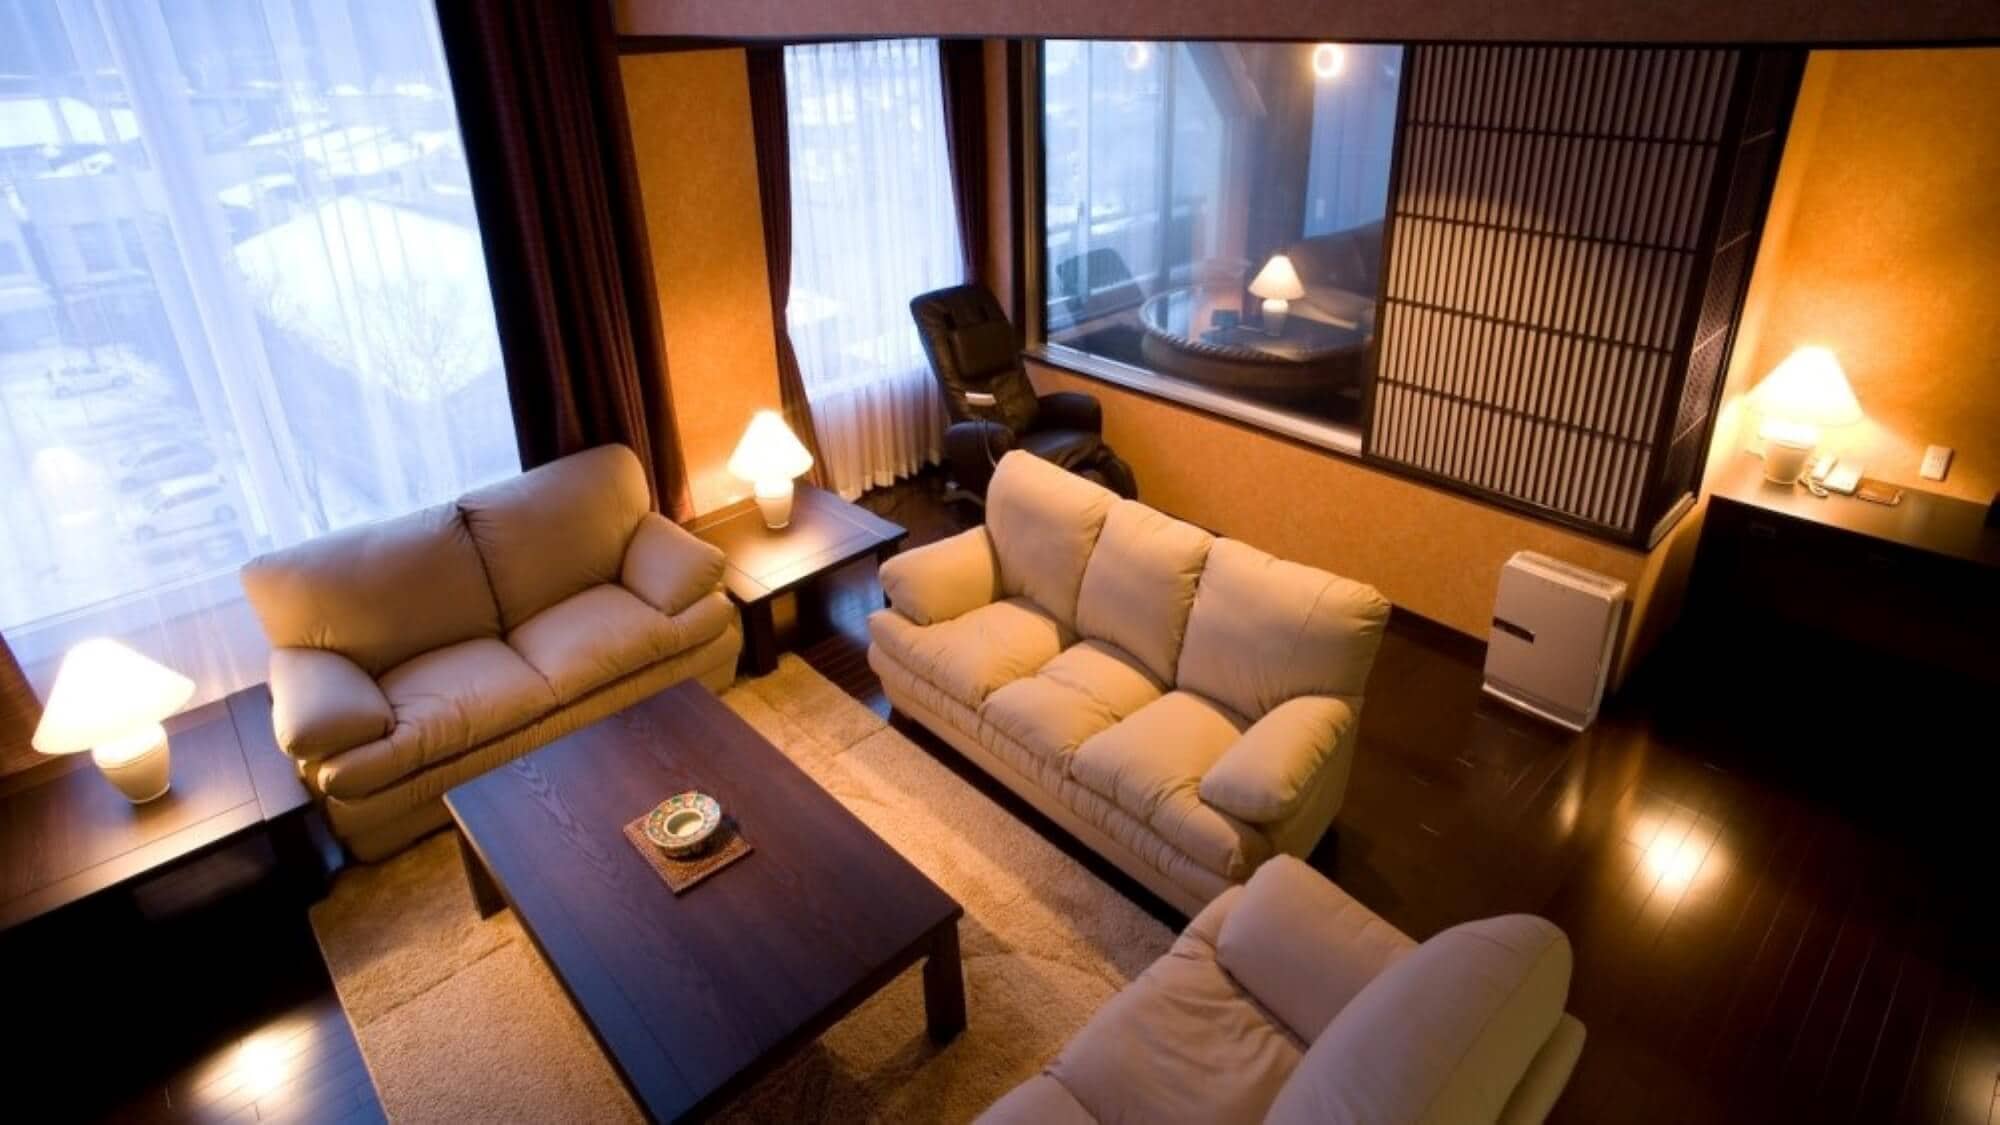 [West Building] Guest room living room * The guest room open-air bath is not a hot spring. Please note.